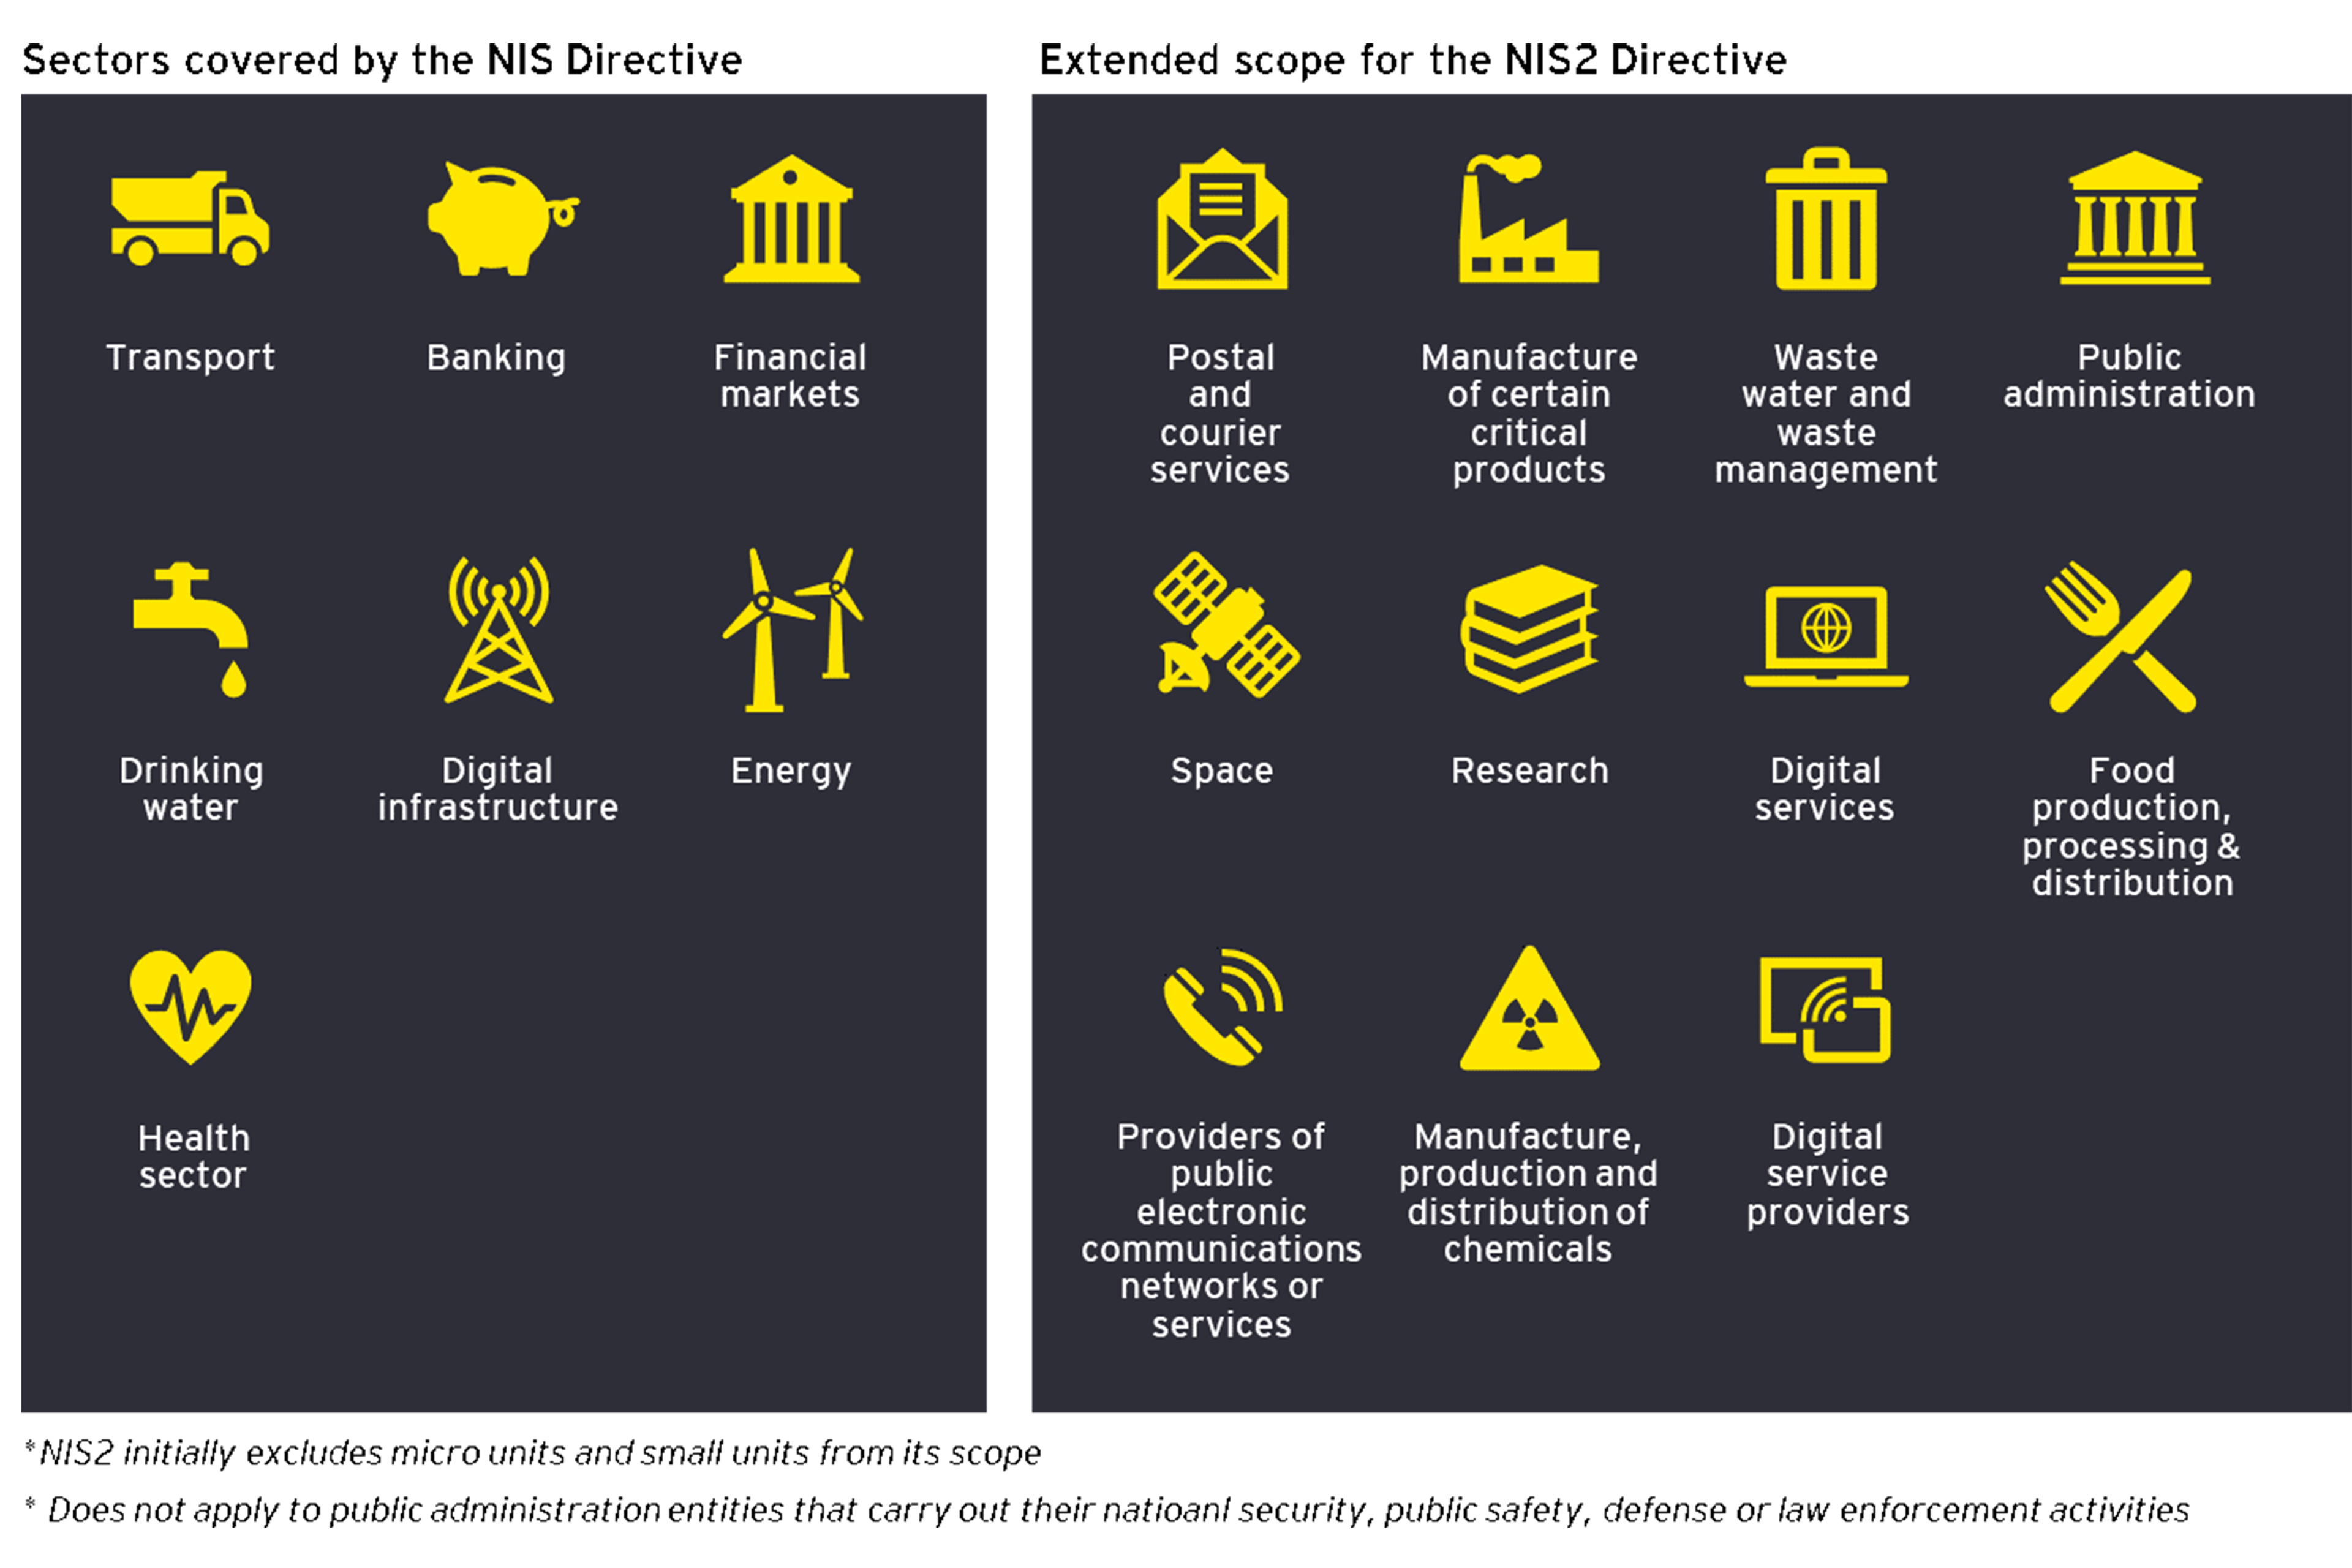 Sectors covered by the NIS2 directive